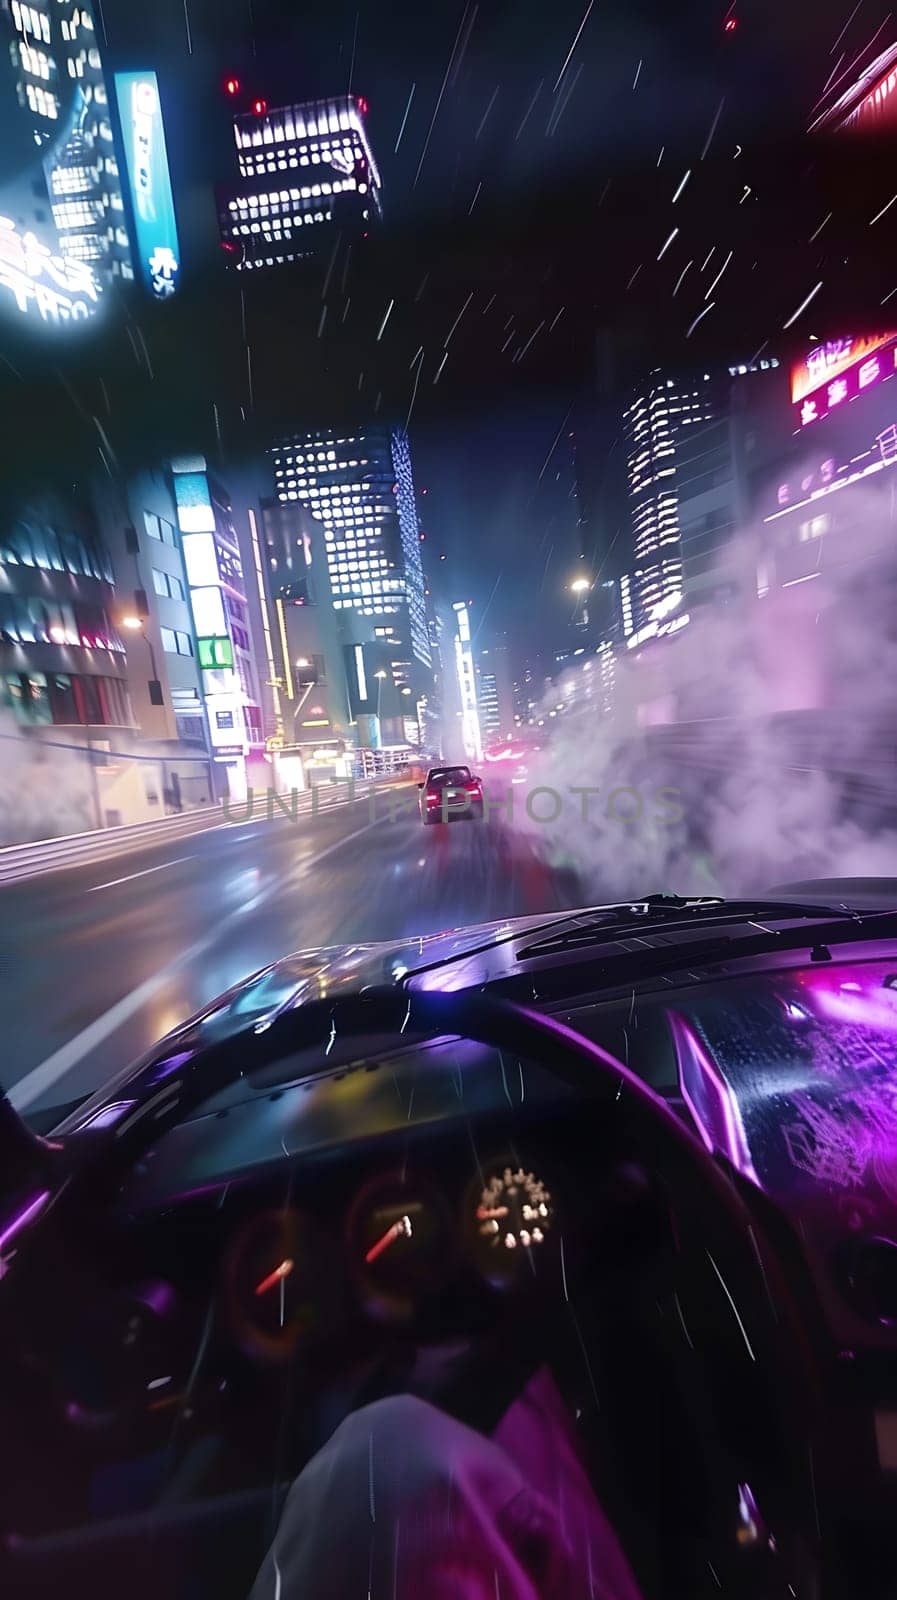 Vehicle with purple automotive lighting driving down city street at night by Nadtochiy